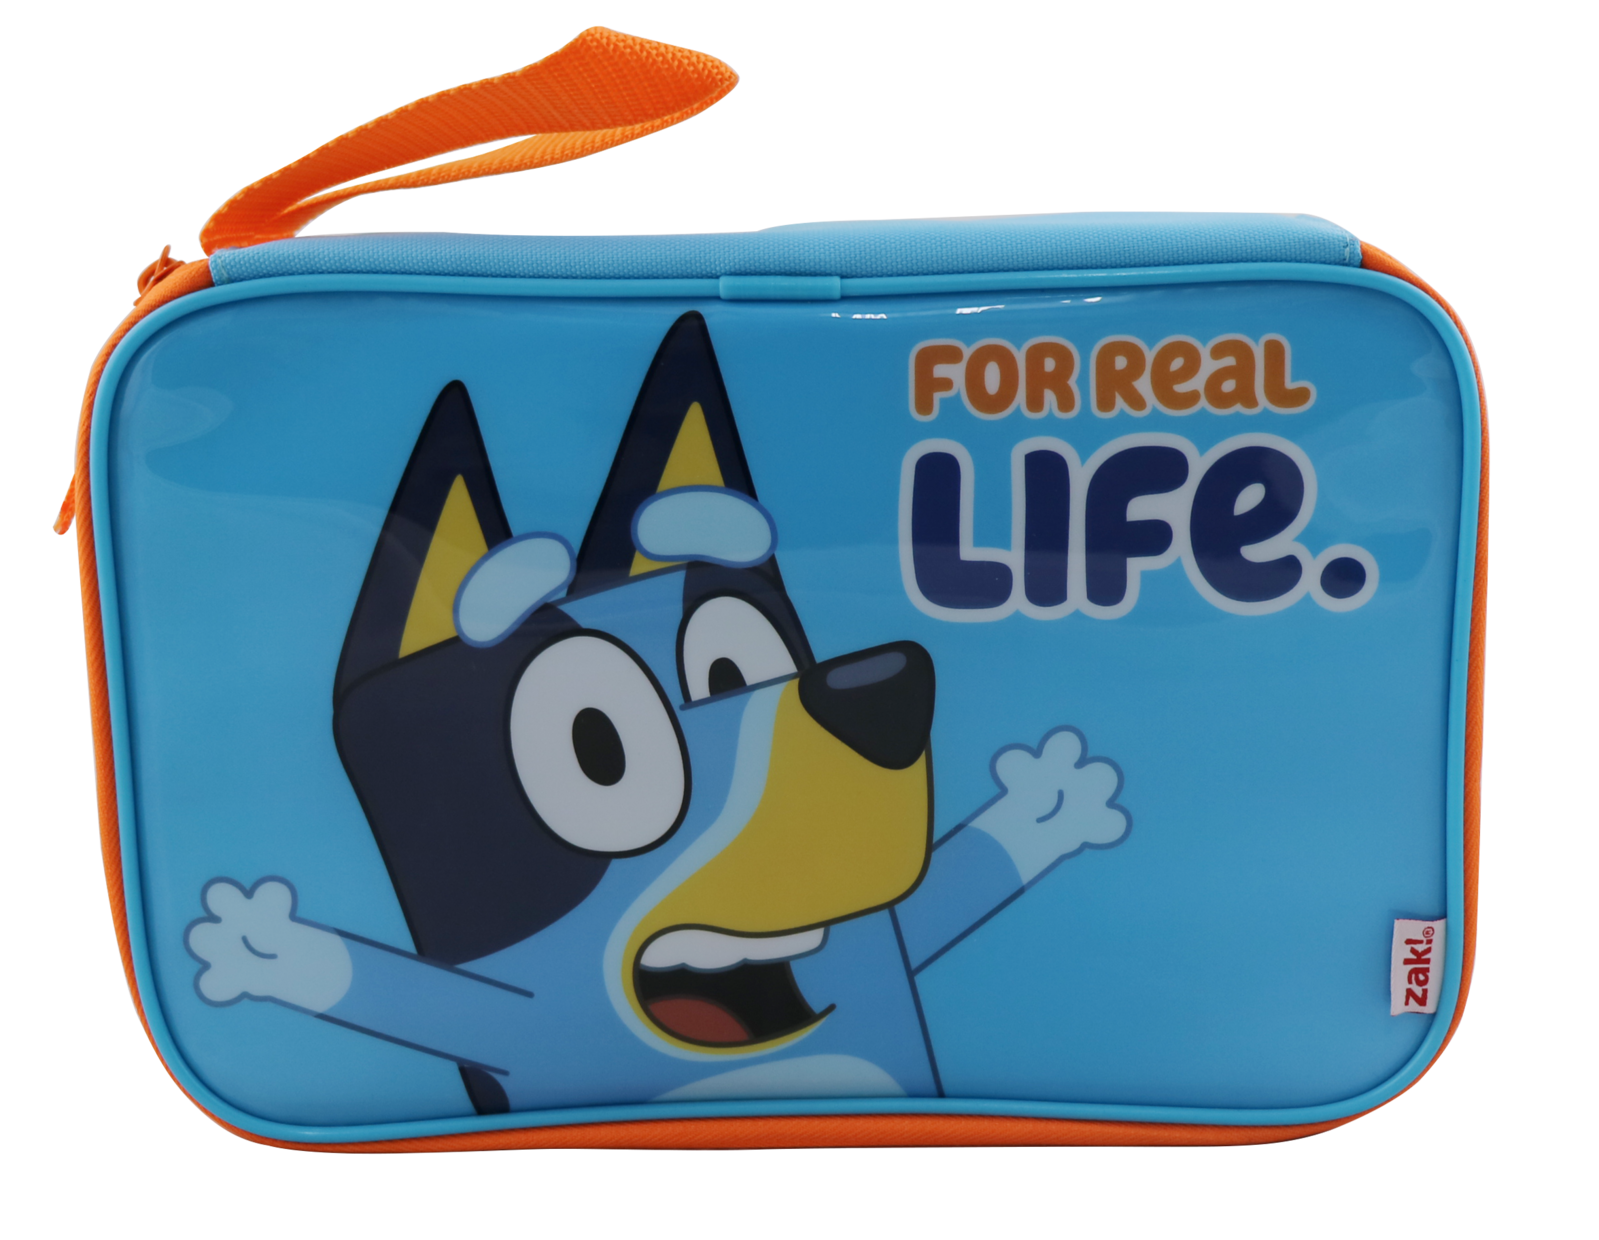 Buy Bluey Insulated Lunch Bag Online